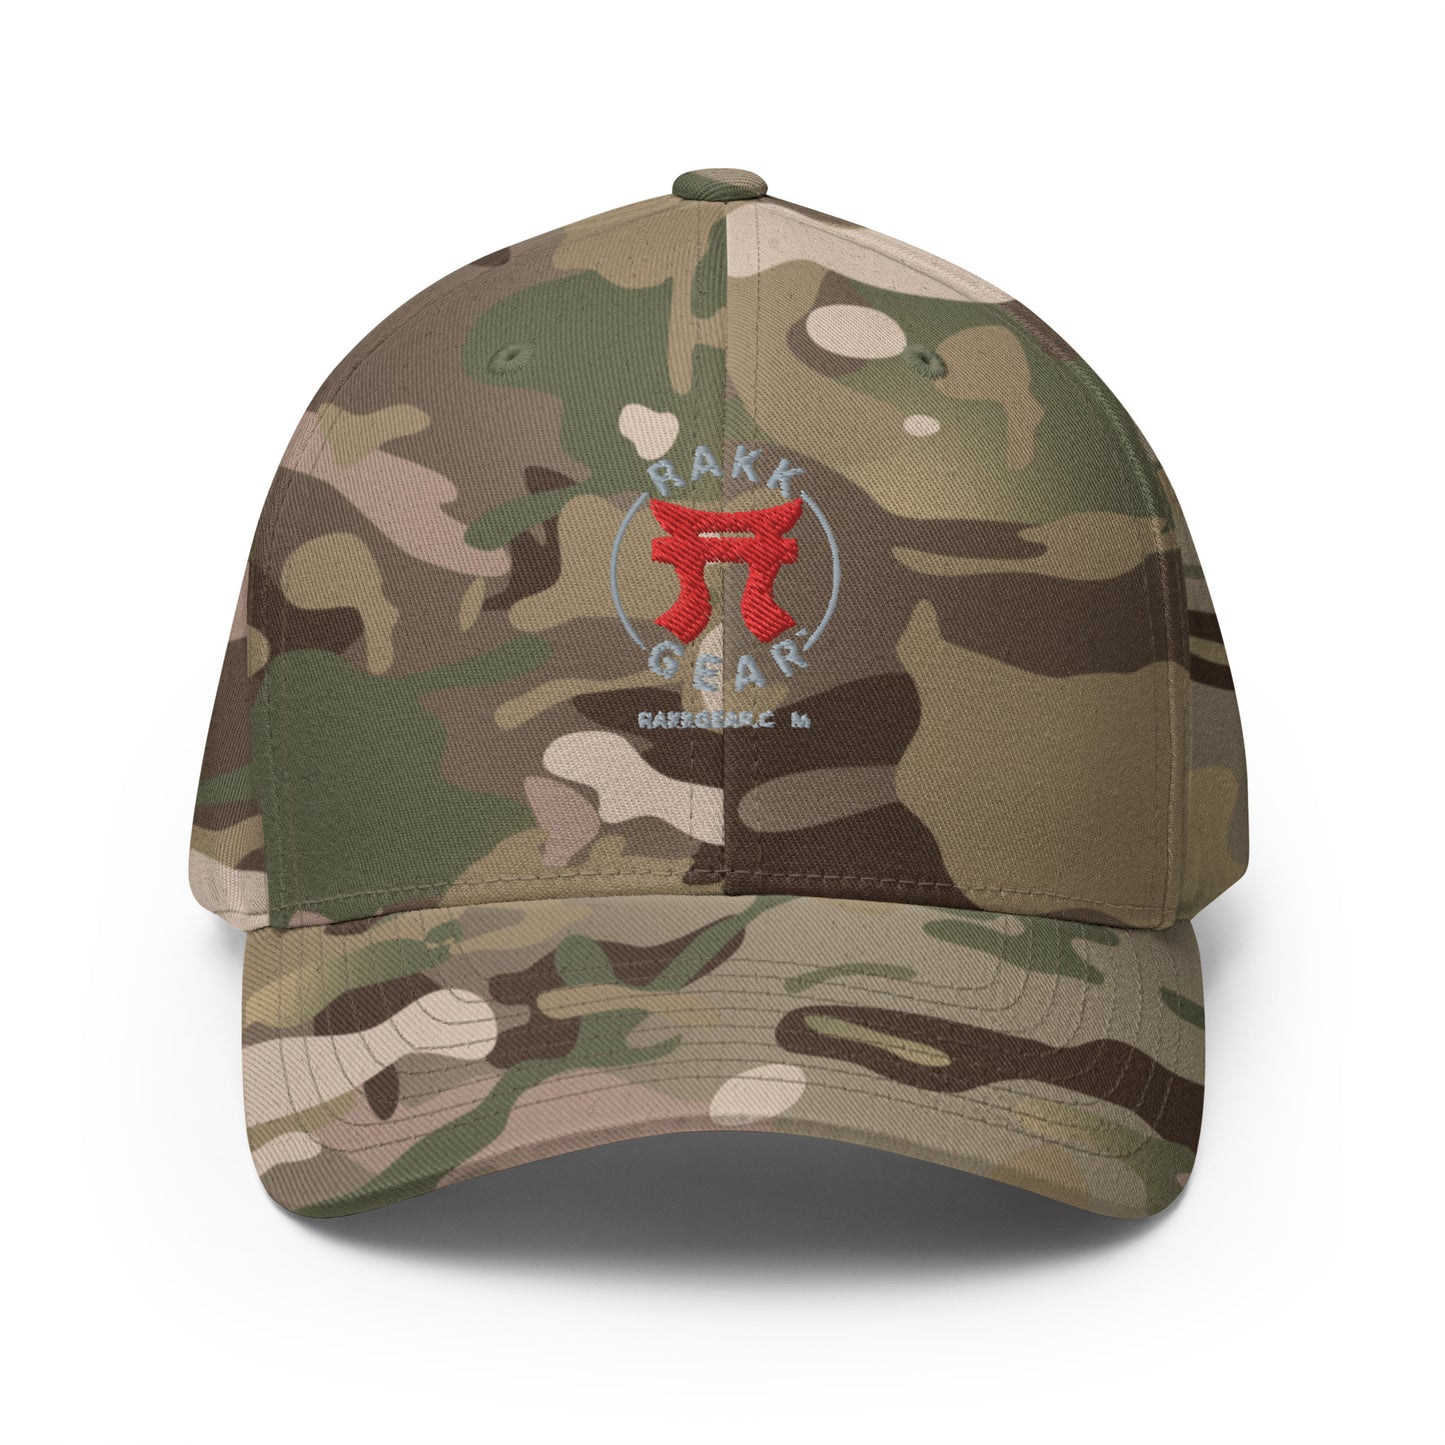 Rakkgear Embroidered Multicam Green Fitted Baseball Cap: Stylish cap with Iconic Rakkgear Logo embroidery on the front.